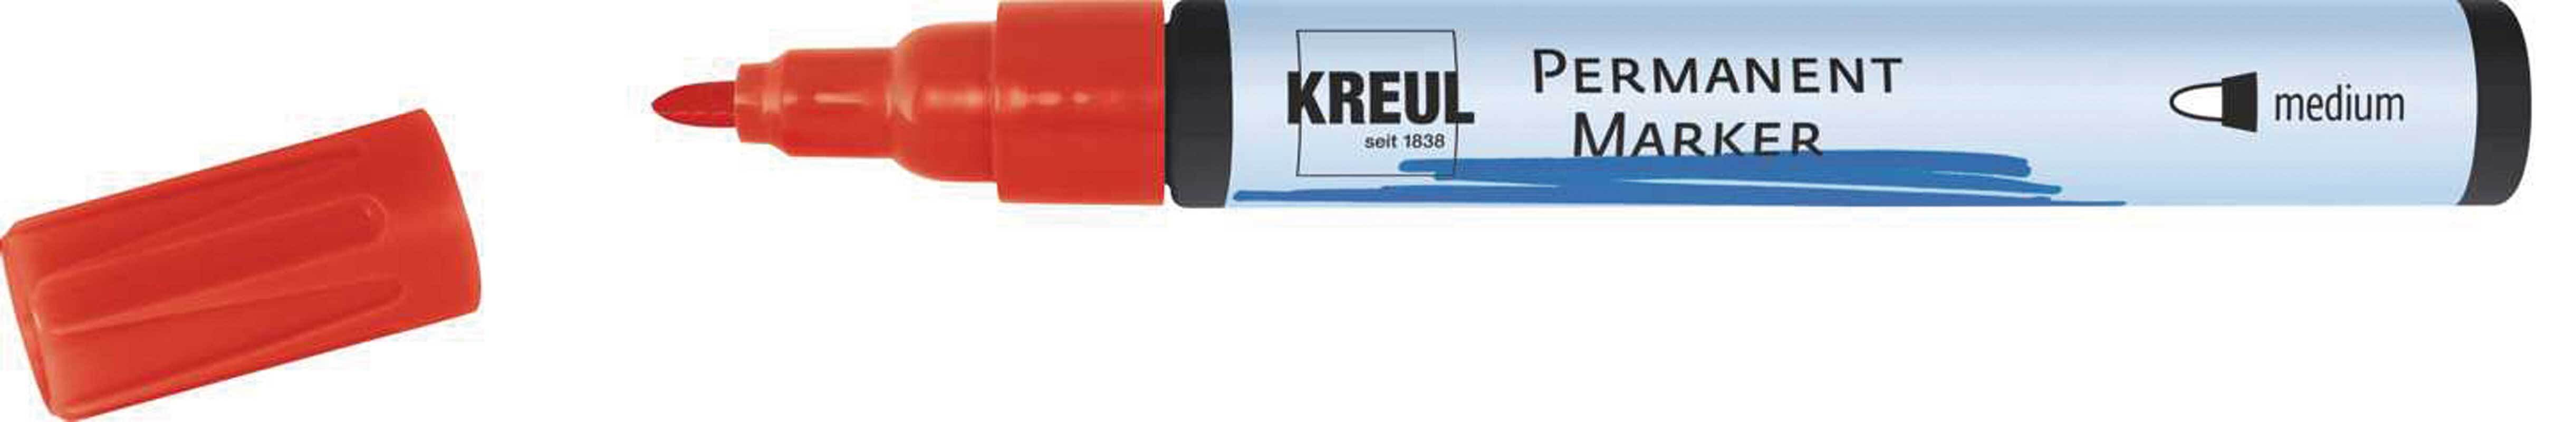 Permanent Marker - 1,5 - 3 mm, rot